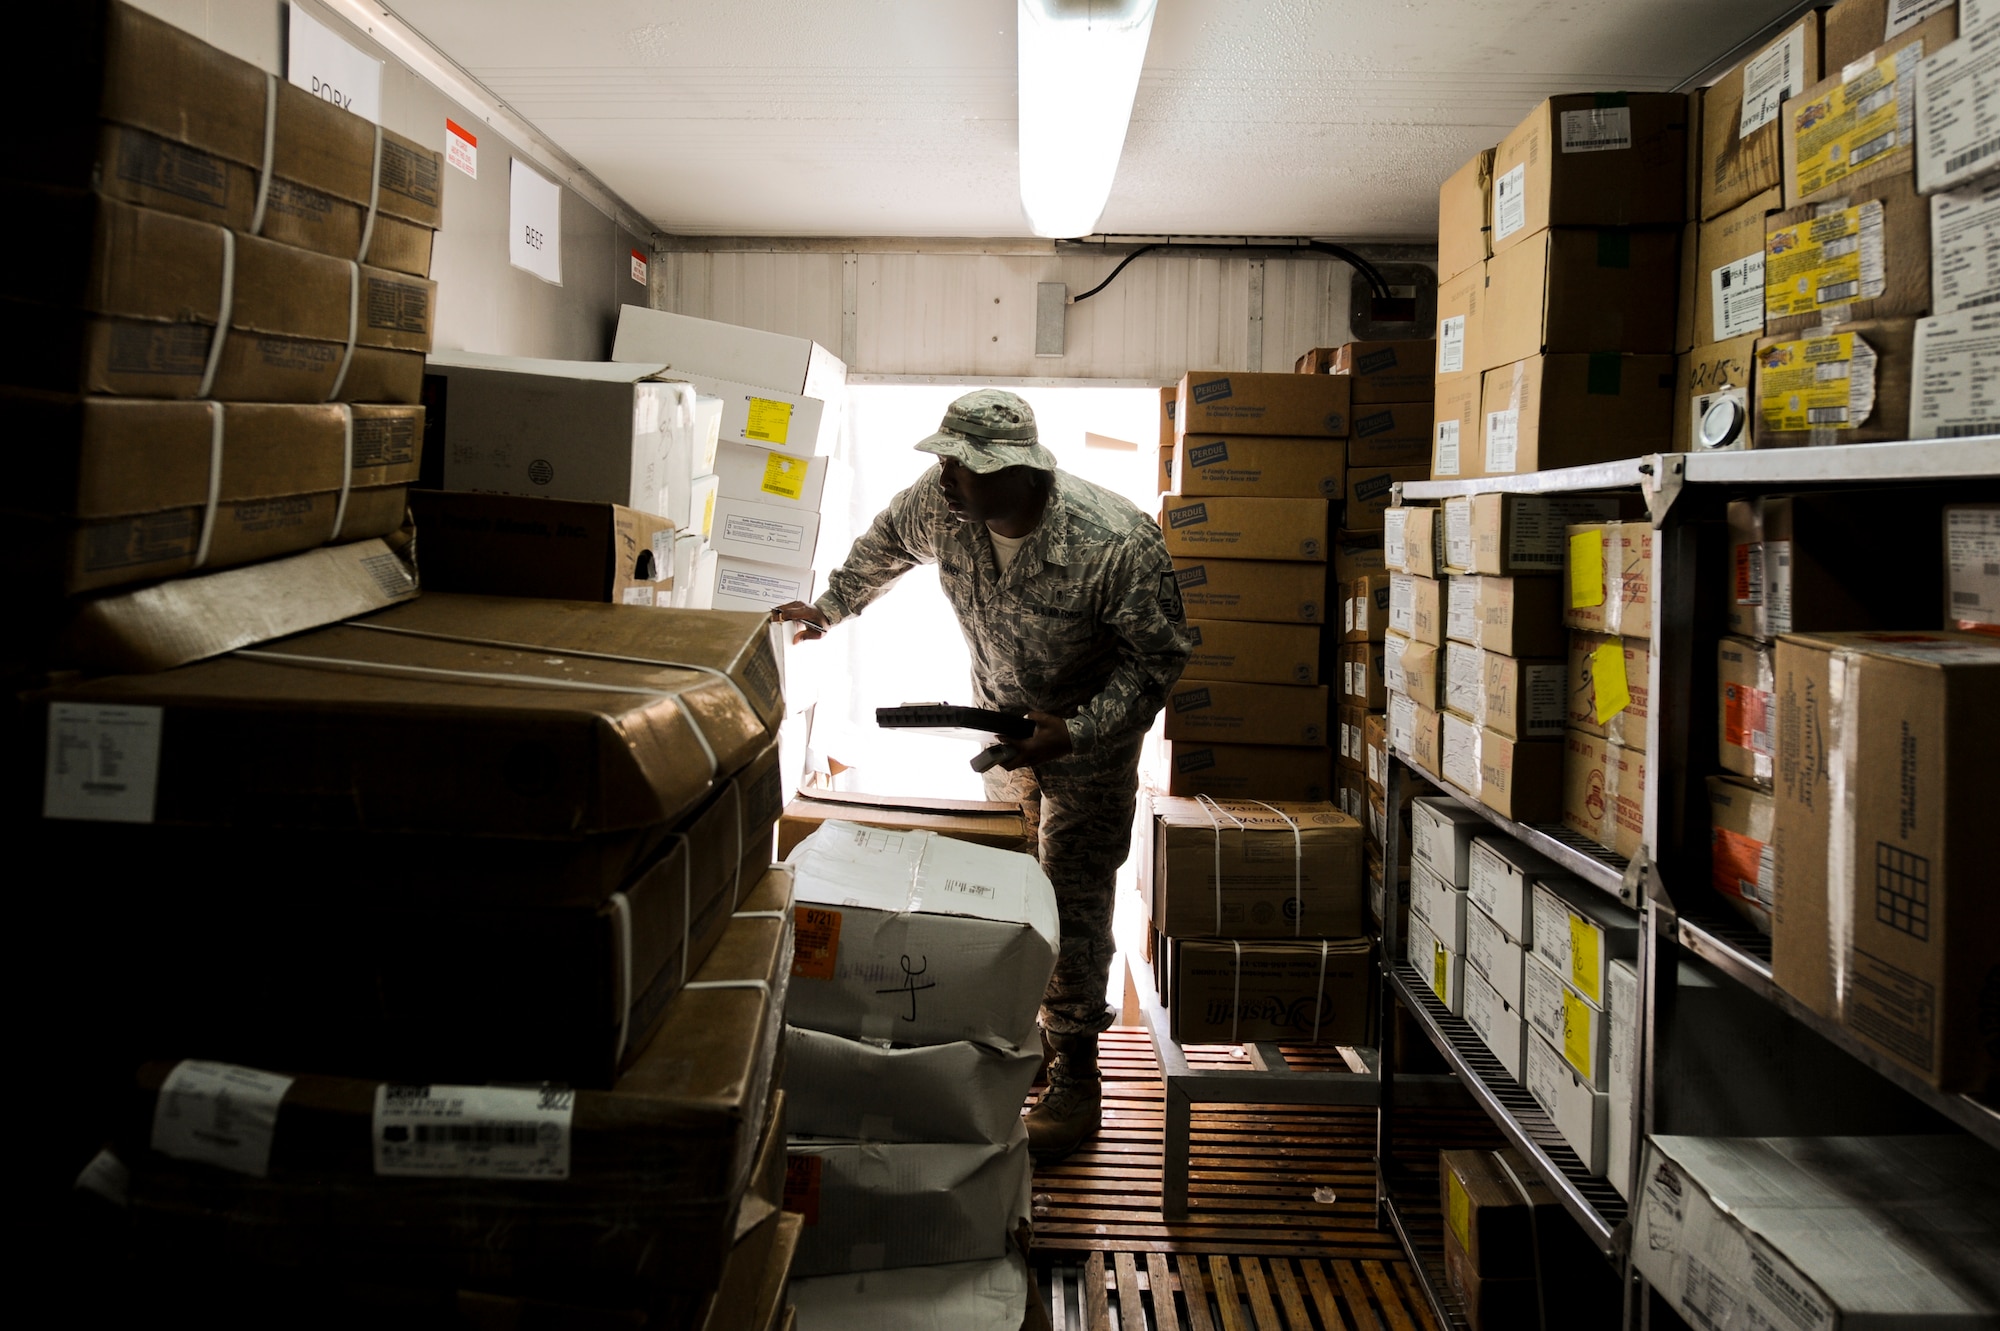 U.S. Air Force Master Sgt. Nathan Hanzy, 380th Expeditionary Medical Group NCO in charge of preventive medicine, checks expiration dates on cold food products at a dining facility during a random facility inspection at an undisclosed location in Southwest Asia July 16, 2013. Hanzy inspects the facilities bi-weekly and ensures Food and Drug Administration standards are met. Hanzy is native to Gray, La., and is deployed from Offutt Air Force Base, Neb. (U.S. Air Force photo by Staff Sgt. Joshua J. Garcia)